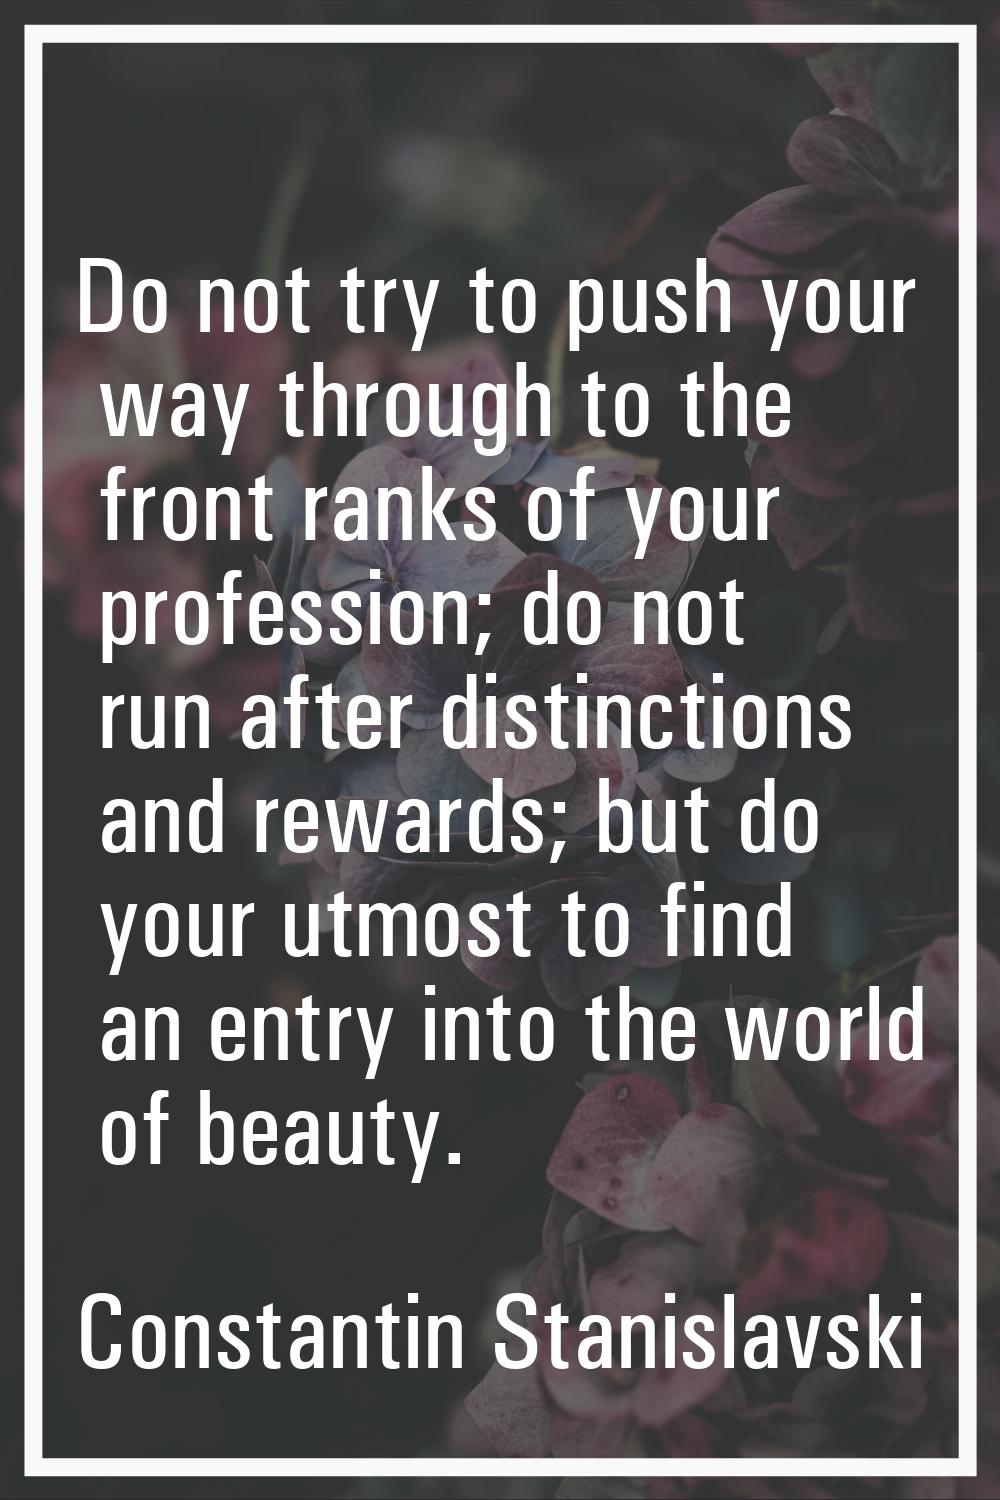 Do not try to push your way through to the front ranks of your profession; do not run after distinc